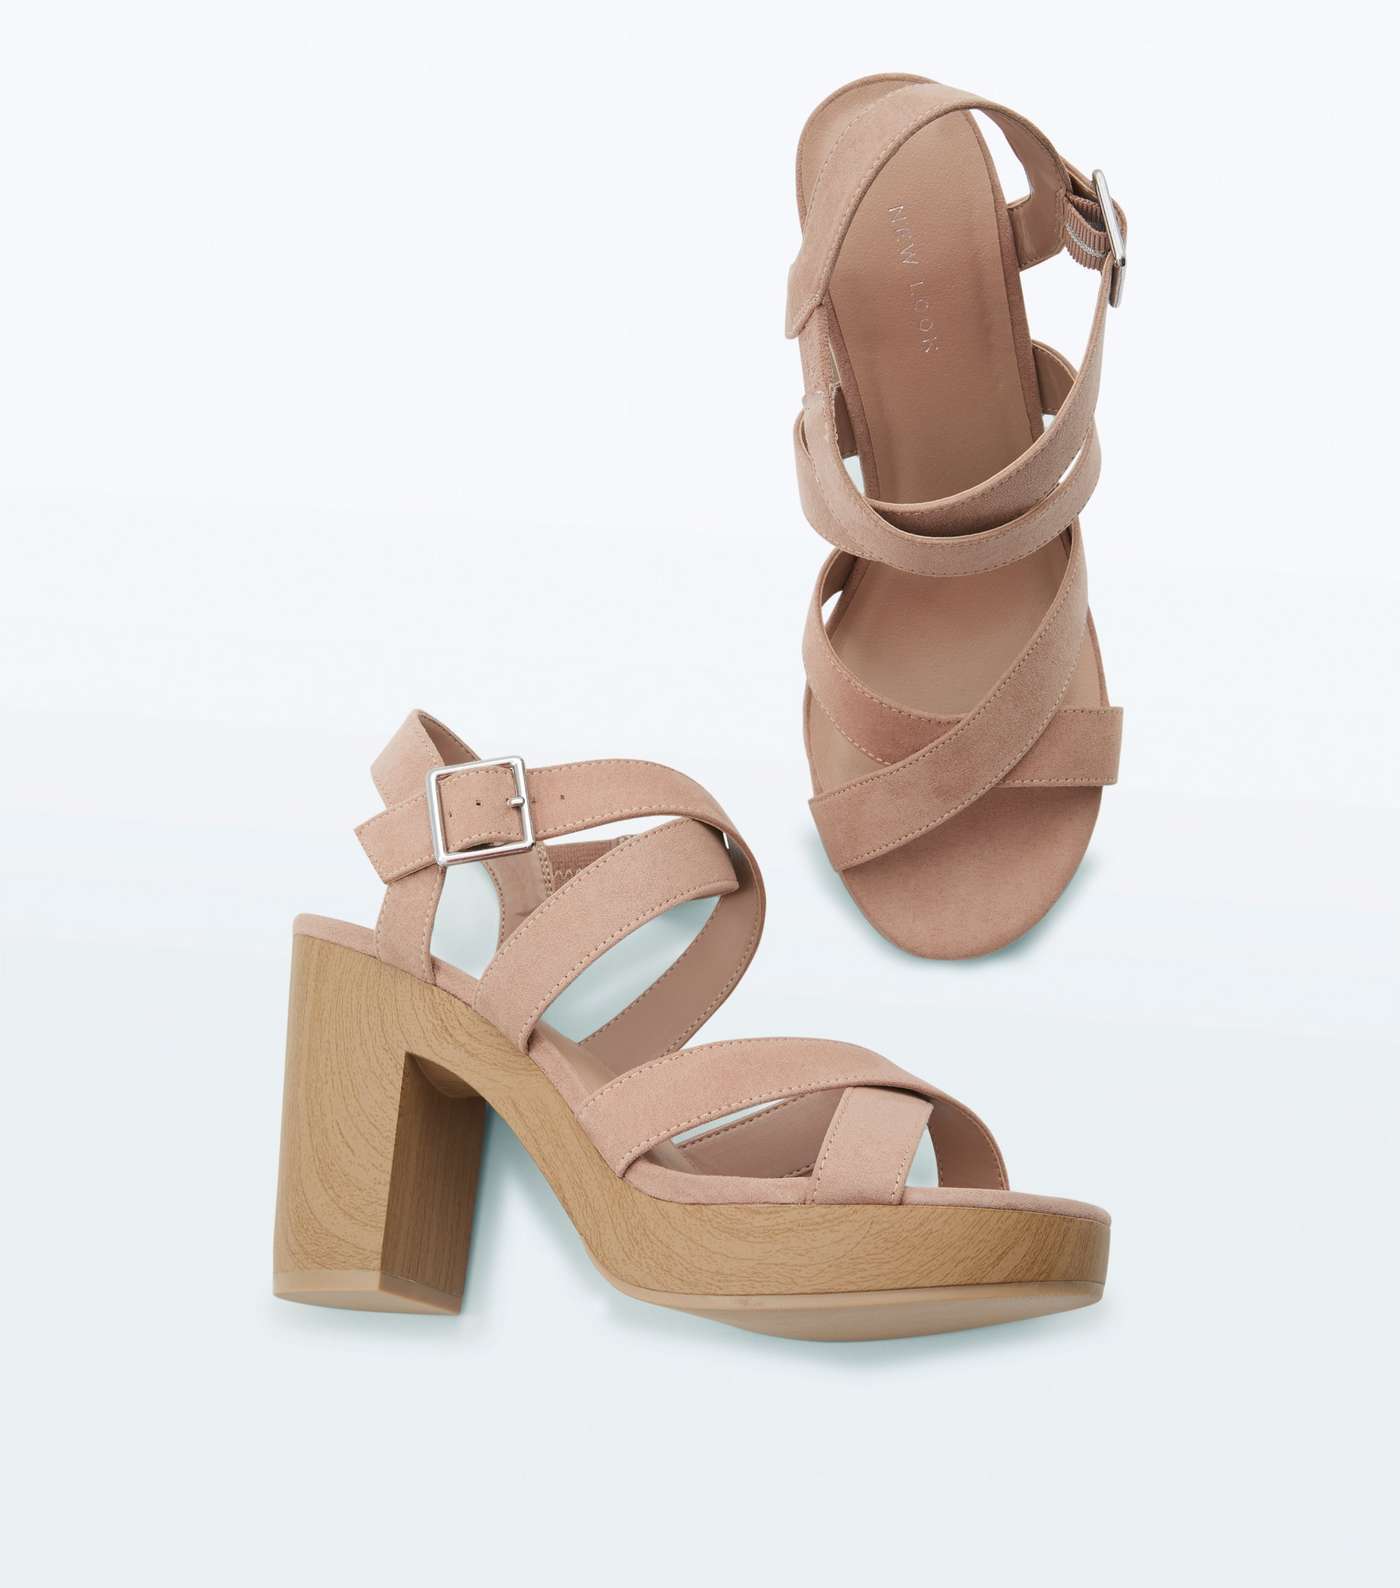 Nude Suedette Strappy Wooden Sole Sandals Image 4